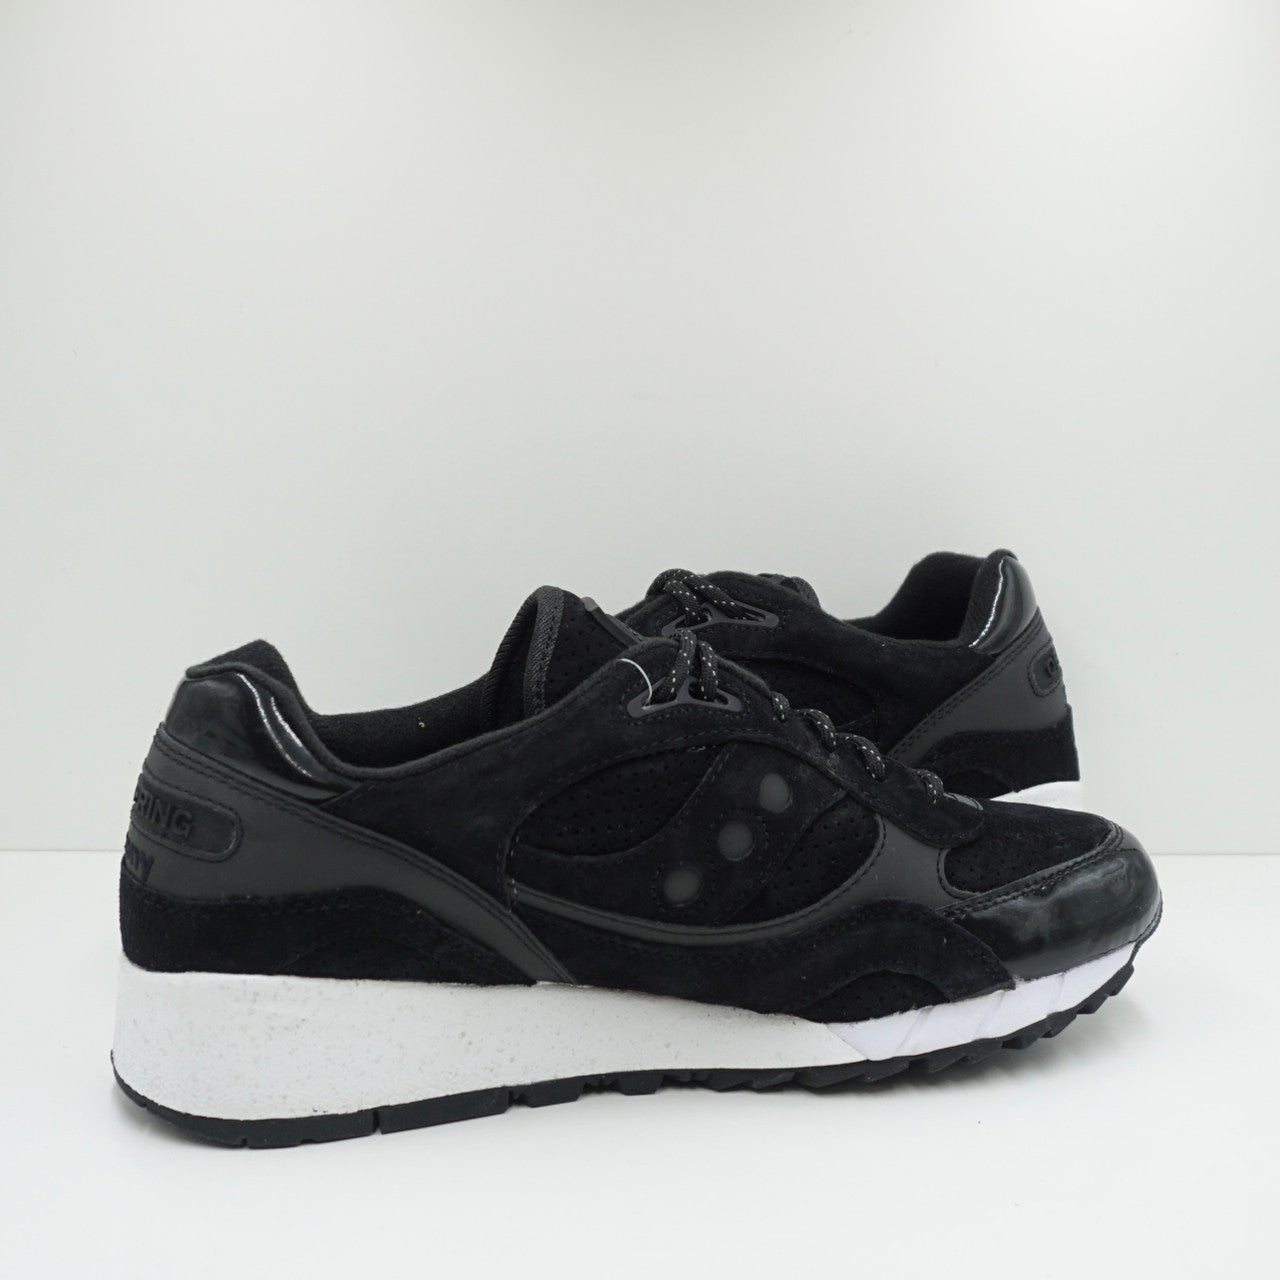 Saucony Shadow 6000 Offspring Stealth